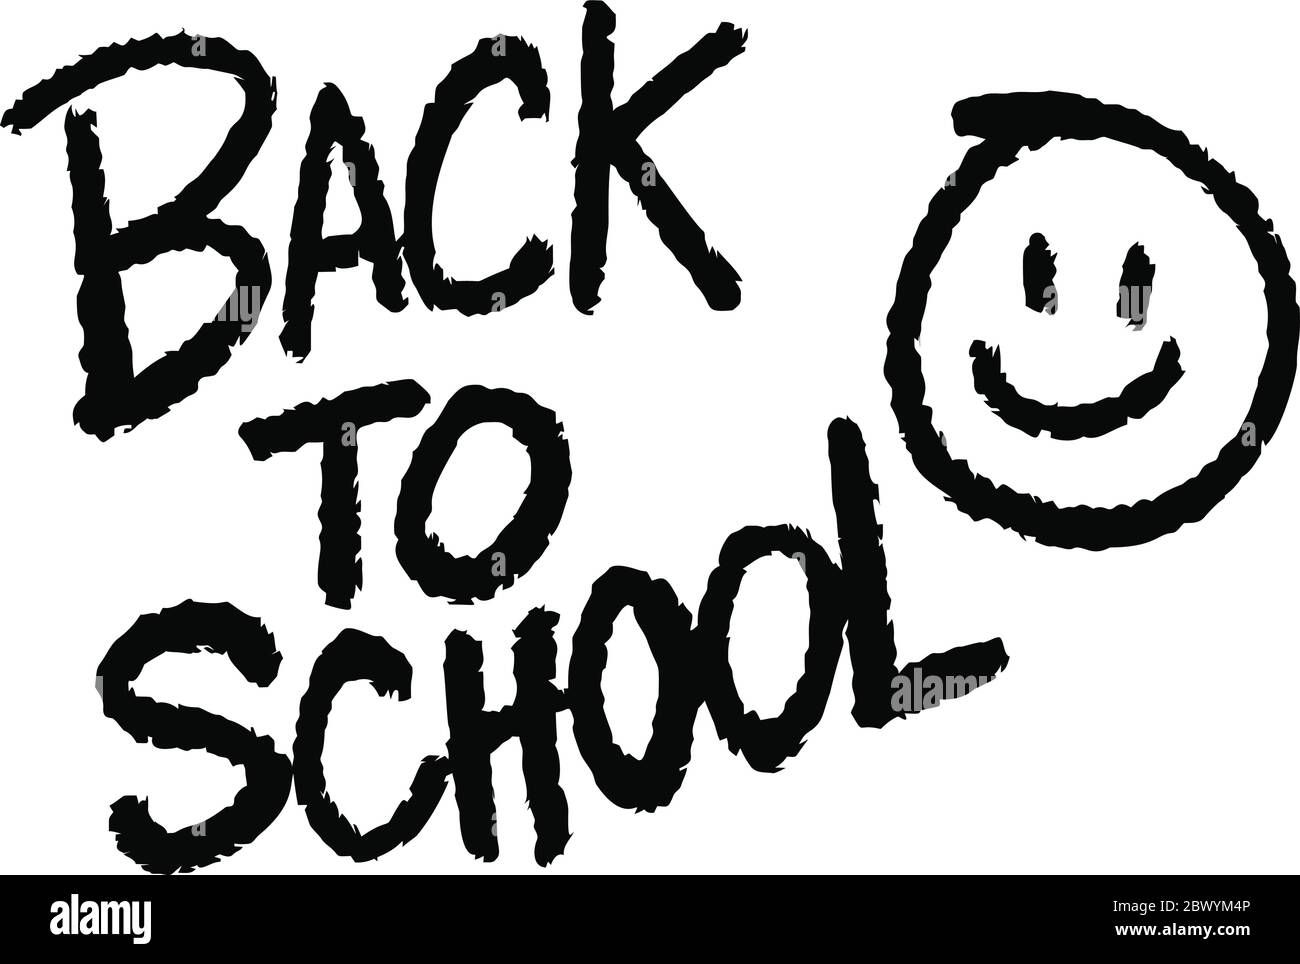 Back to School Text with Smiley Face- An Illustration of a Back to School Text with a Smiley Face. Stock Vector